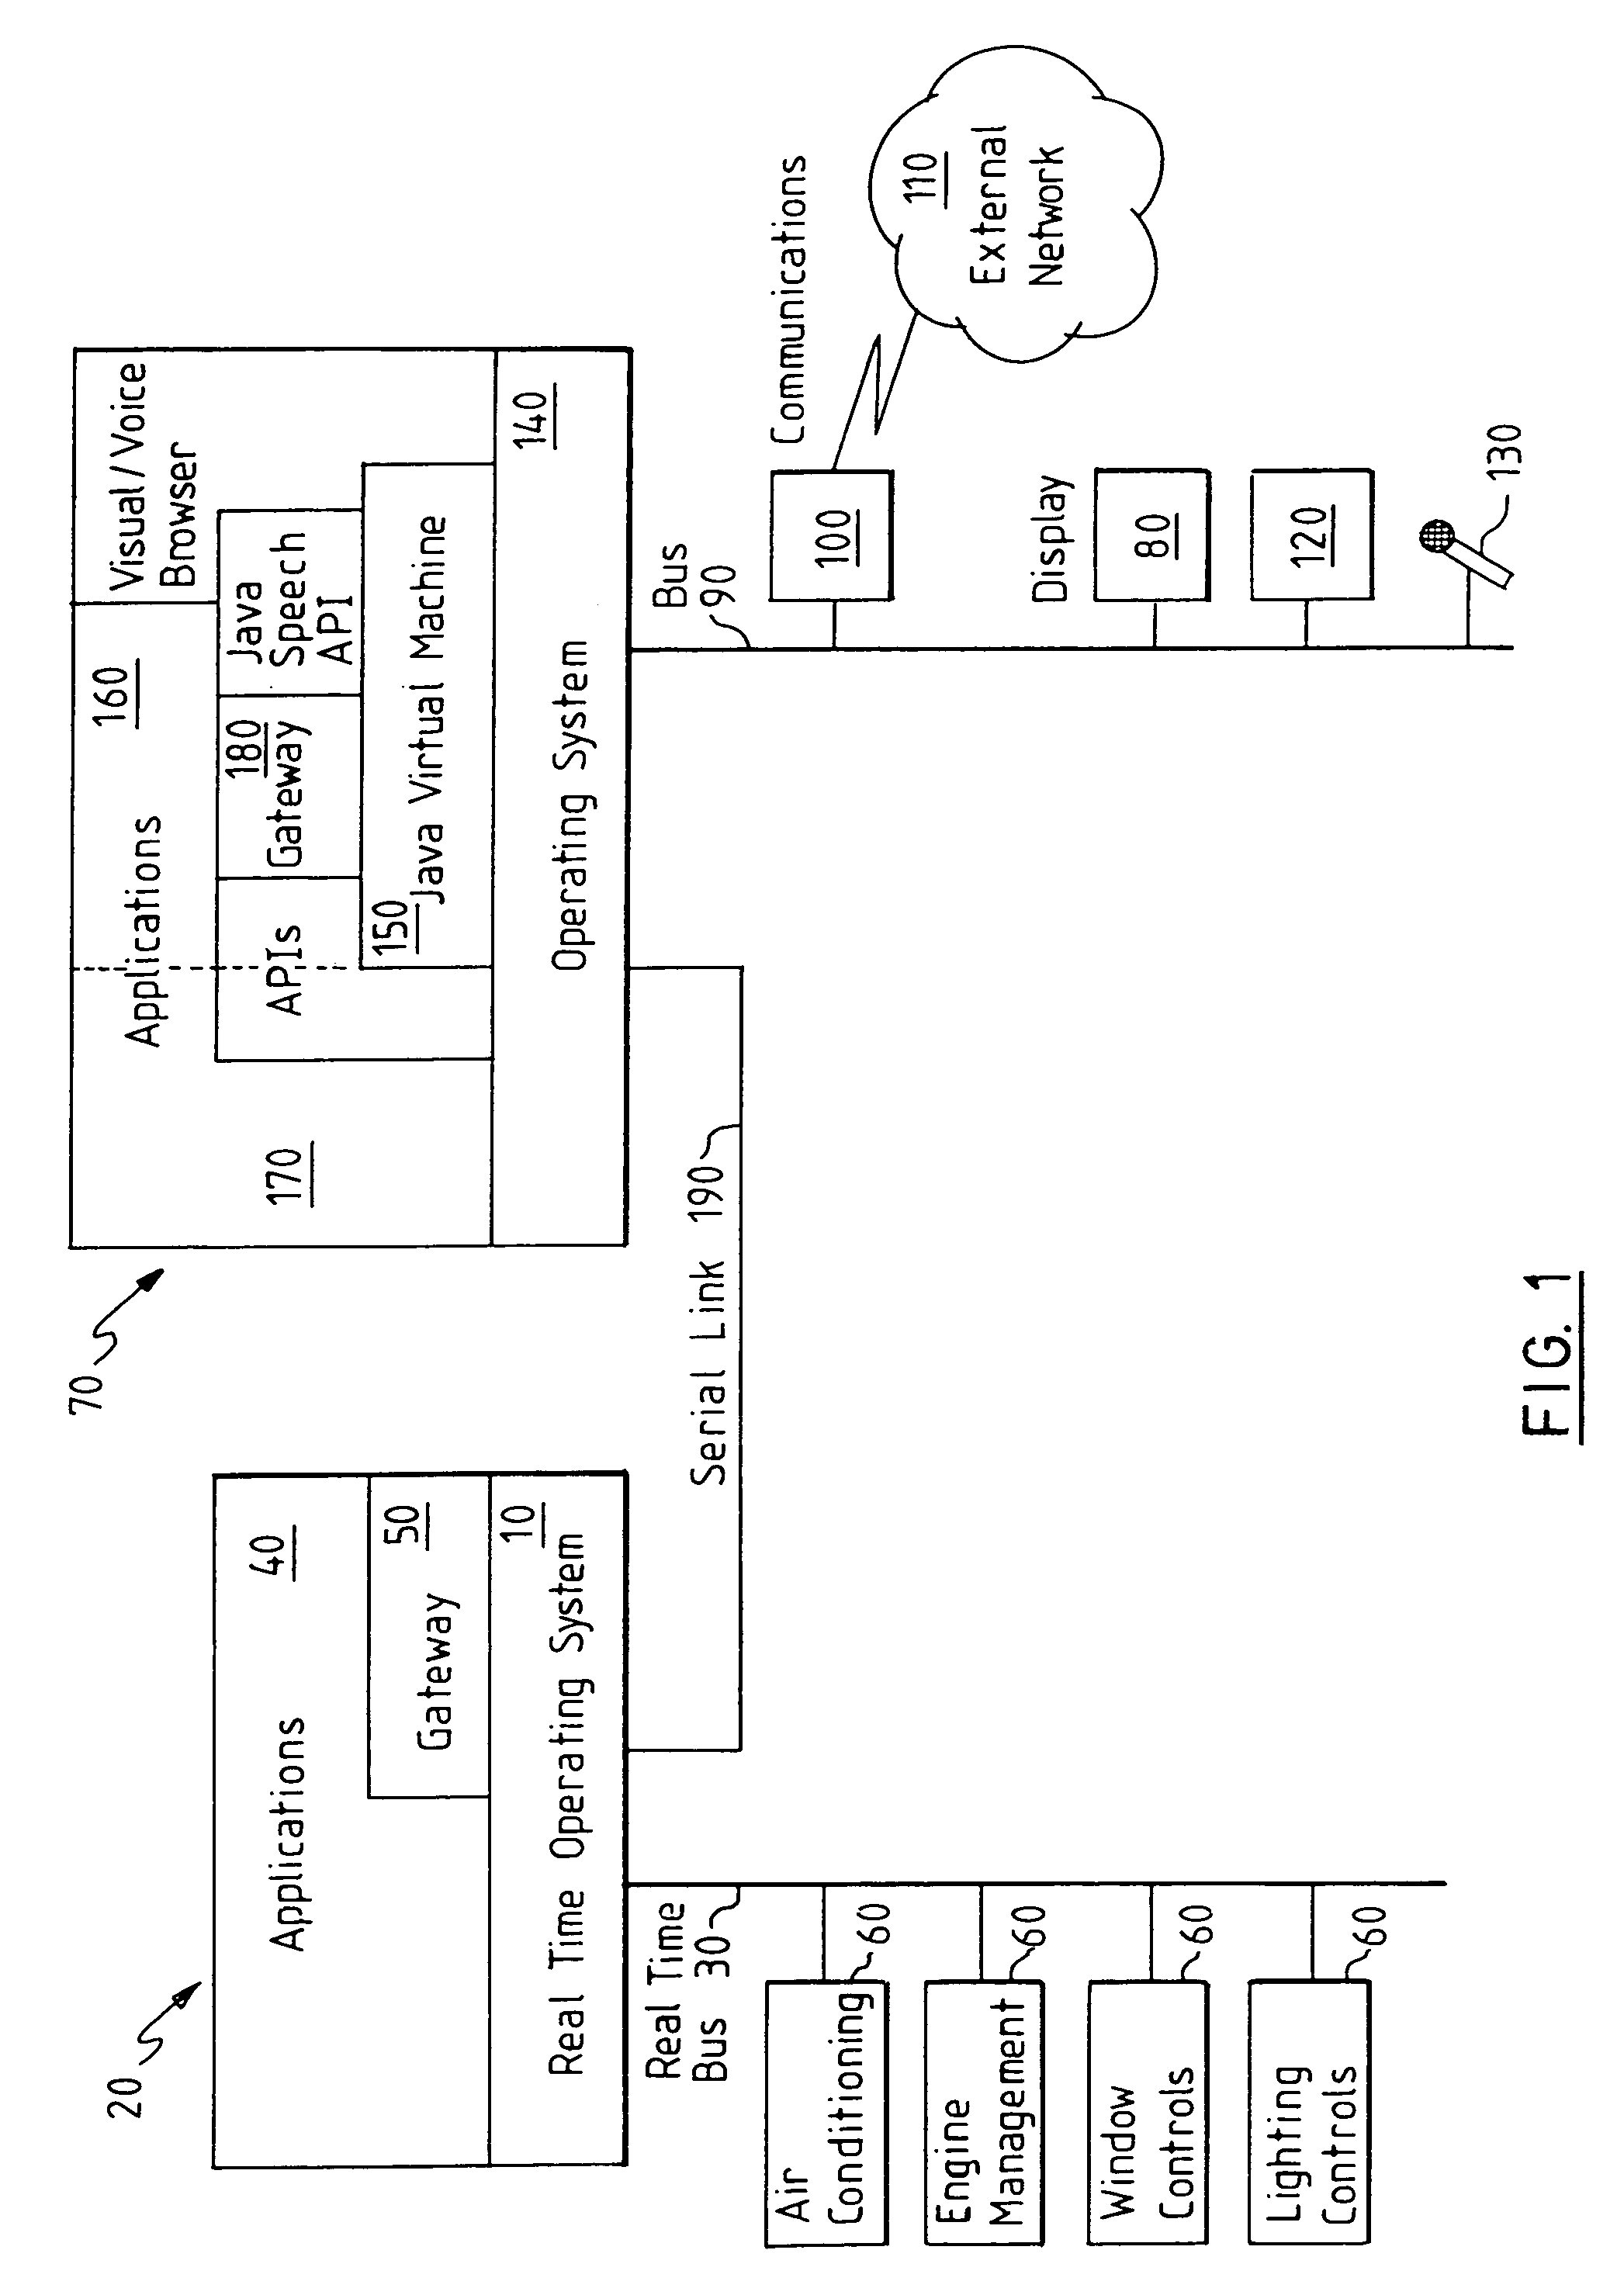 Security for network-connected vehicles and other network-connected processing environments